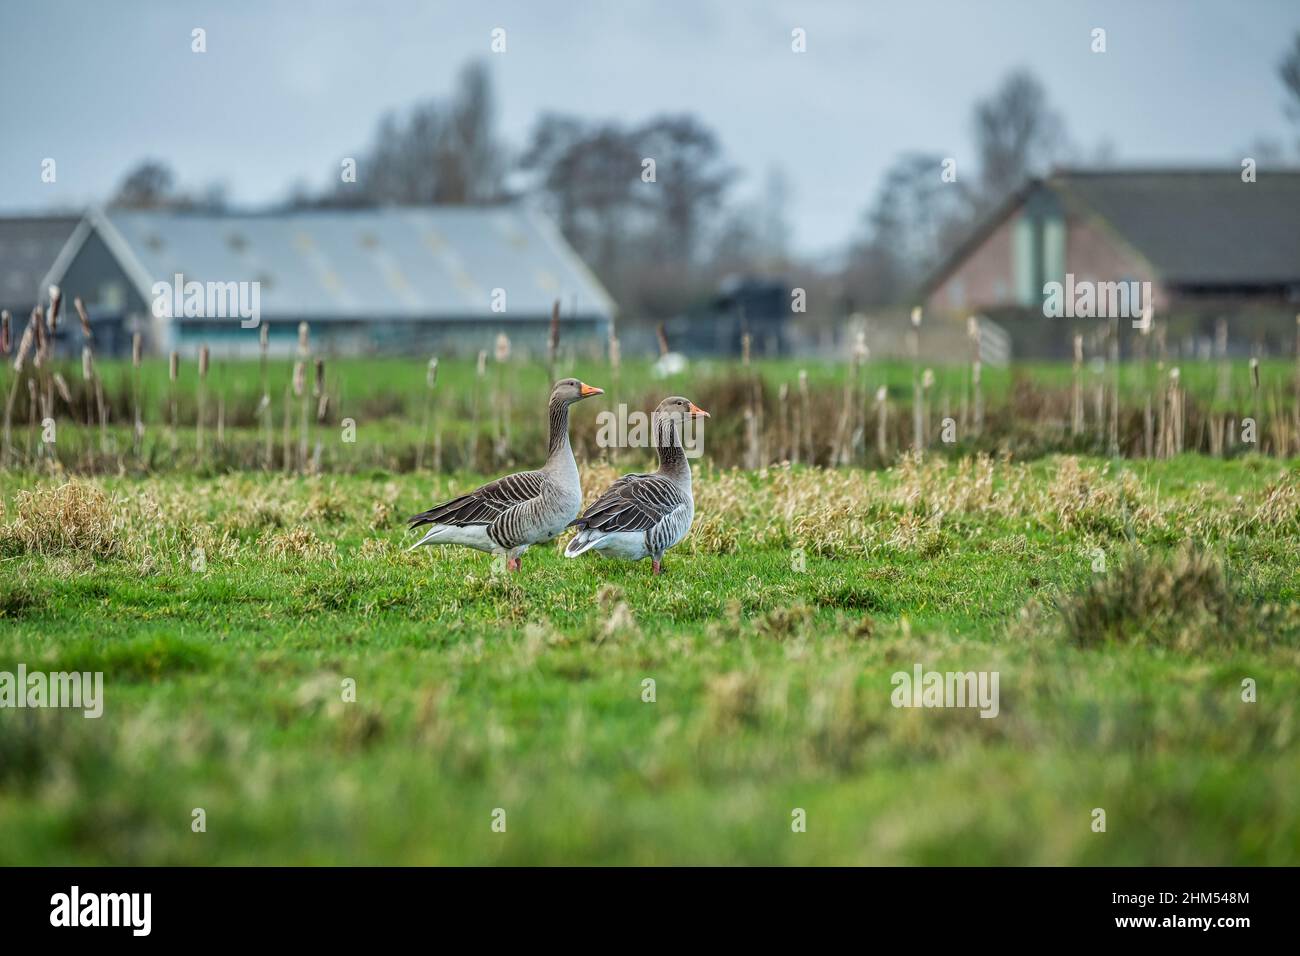 Two Greylag Geese, Anser anser, in focus with nice striped feather pattern and white underside in a green grassy Dutch polder meadow Stock Photo